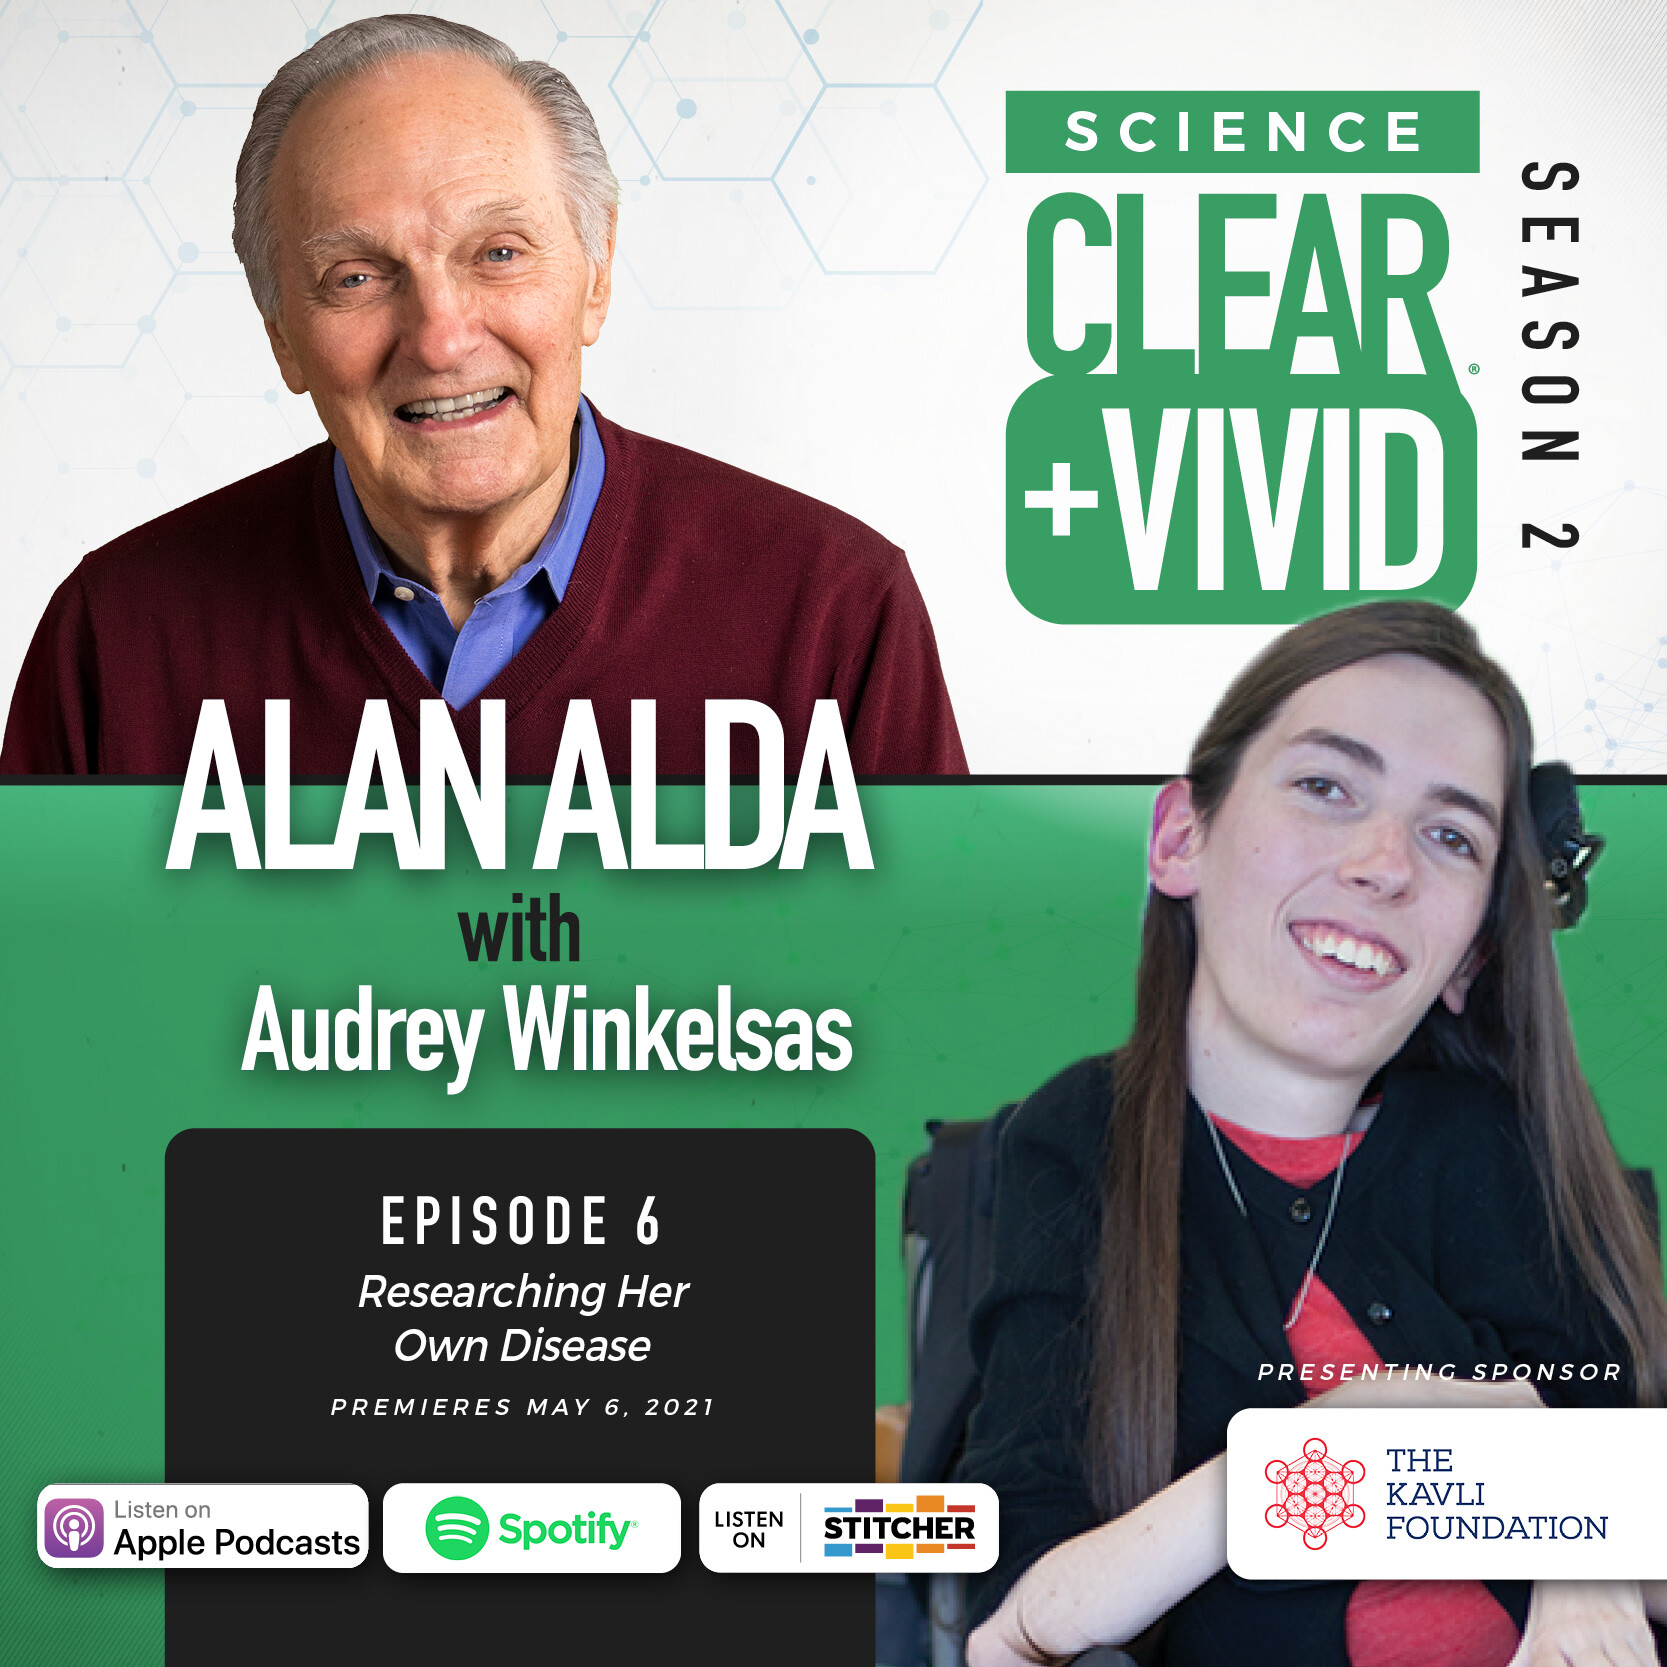 Science Clear + Vivid: Researching Her Own Disease